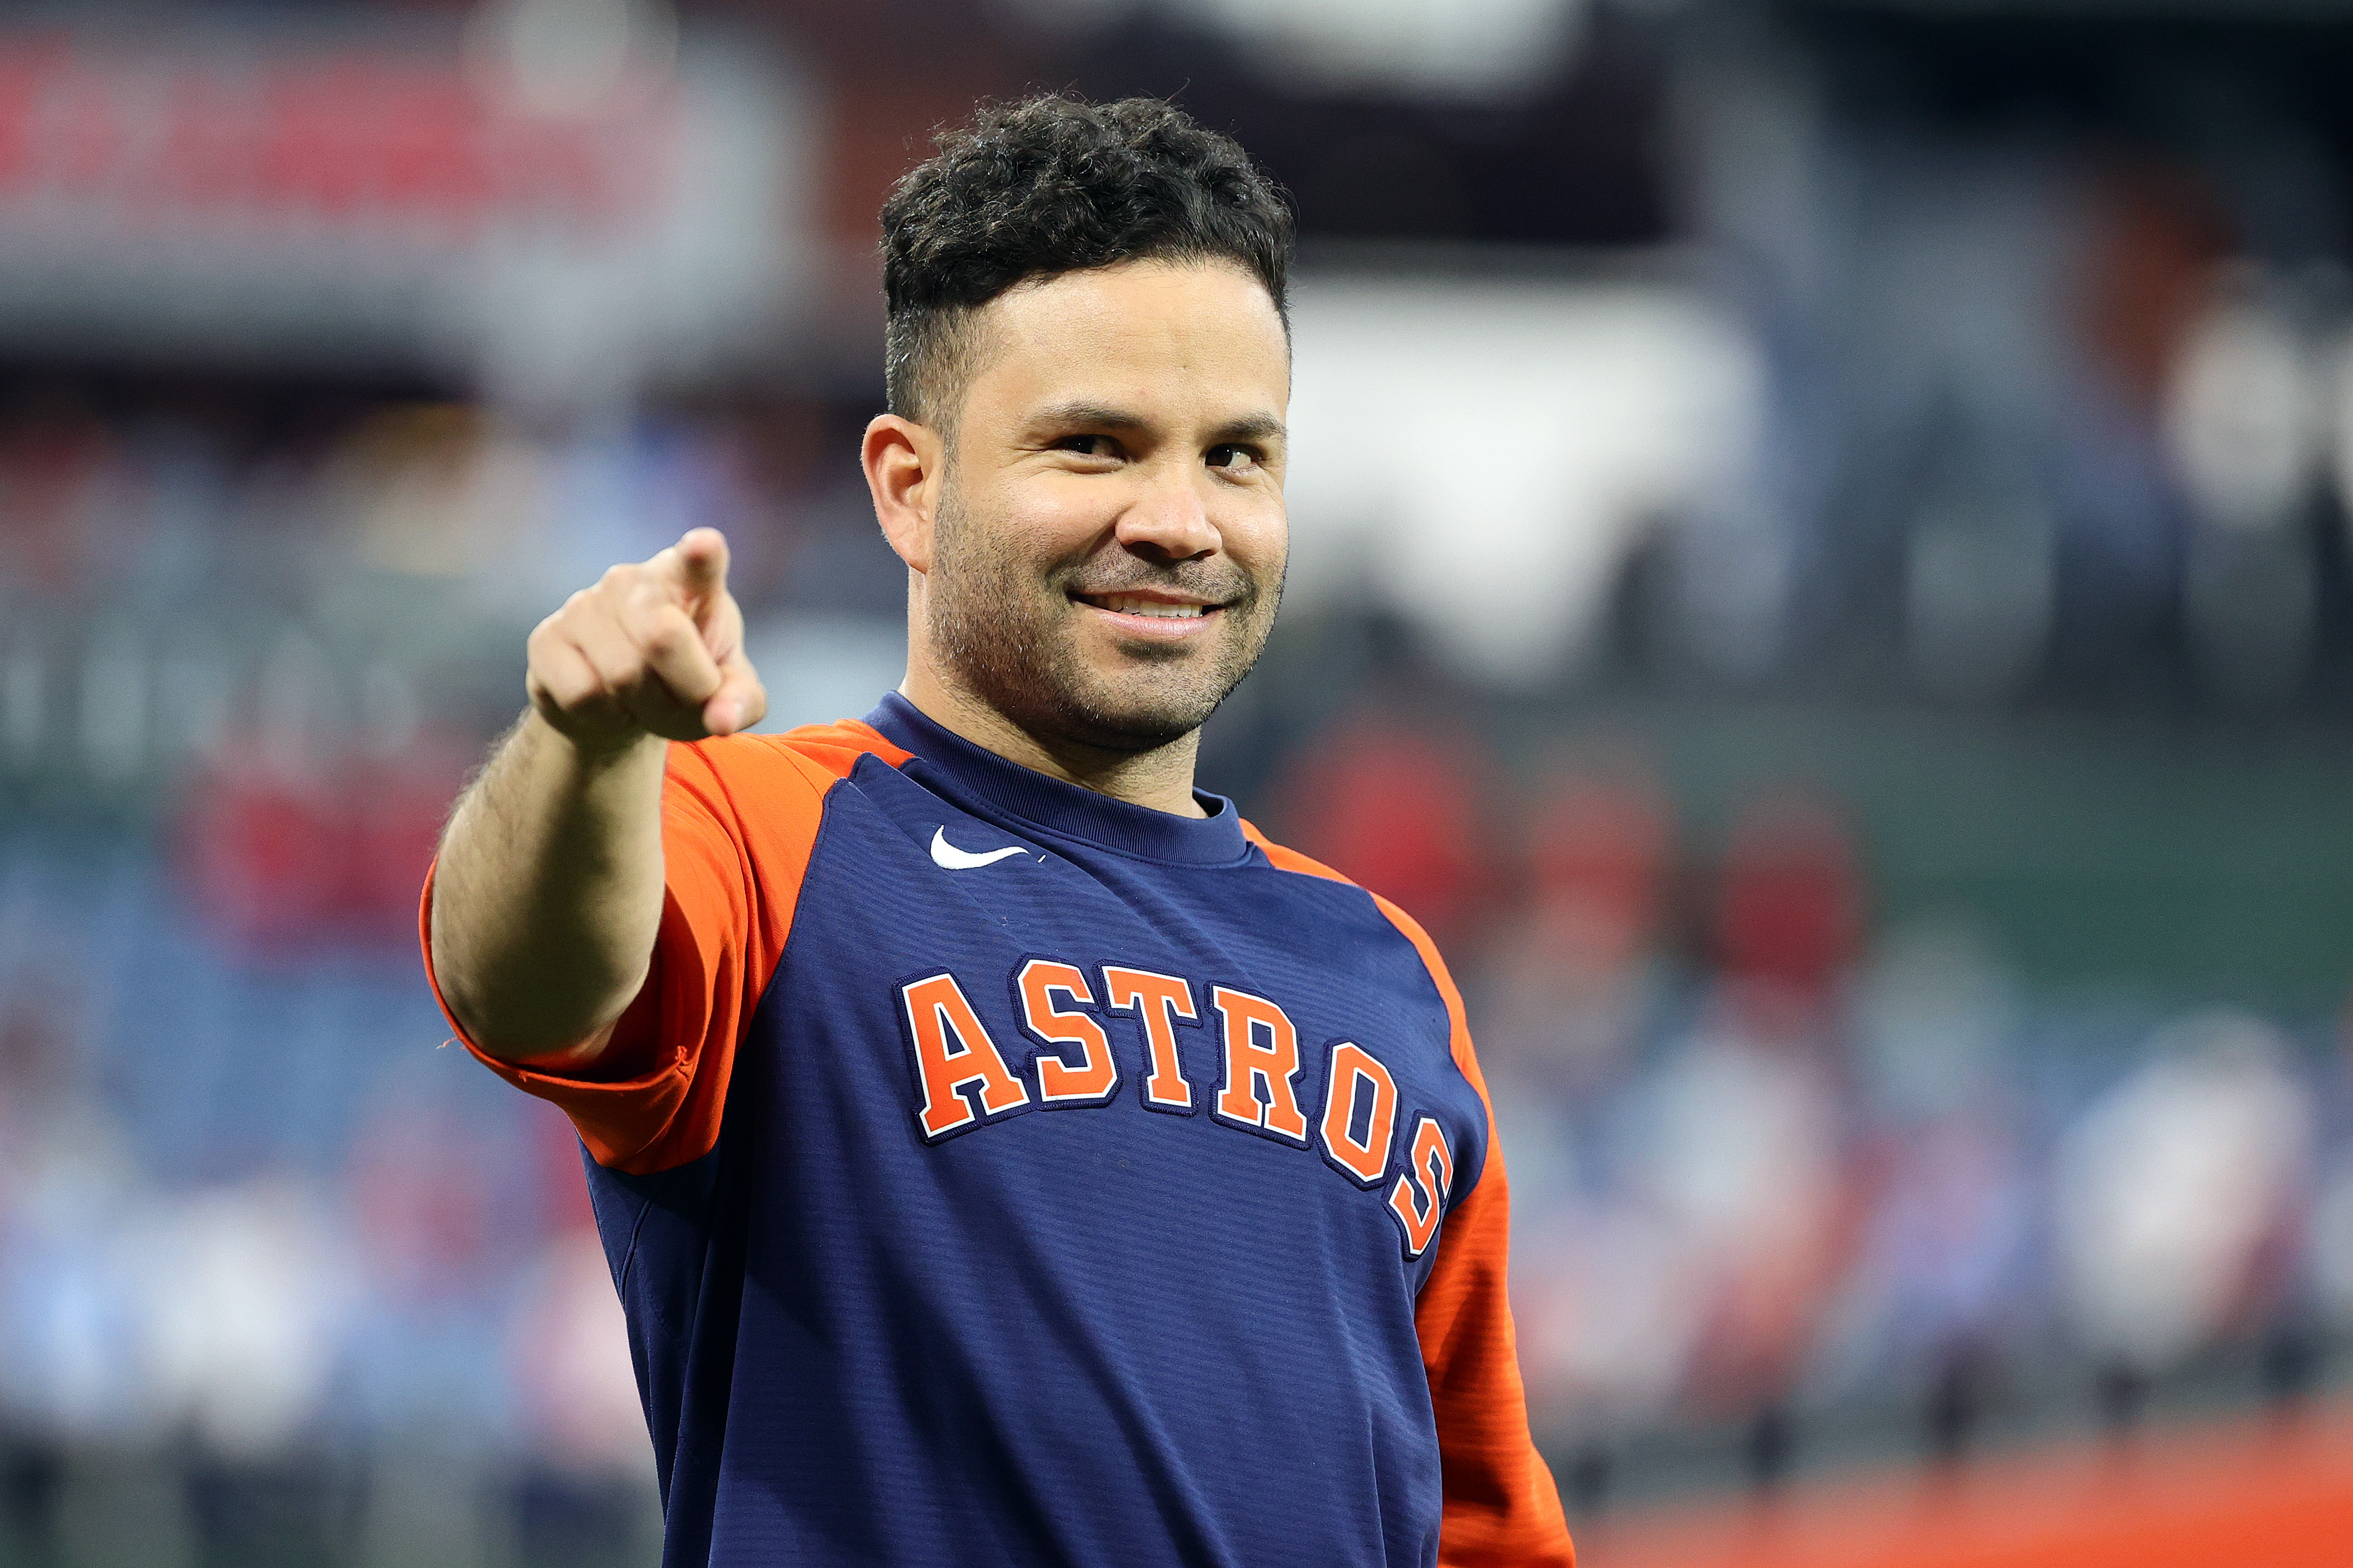 Jose Altuve Still Can't Get Over How Small He Looks Out There